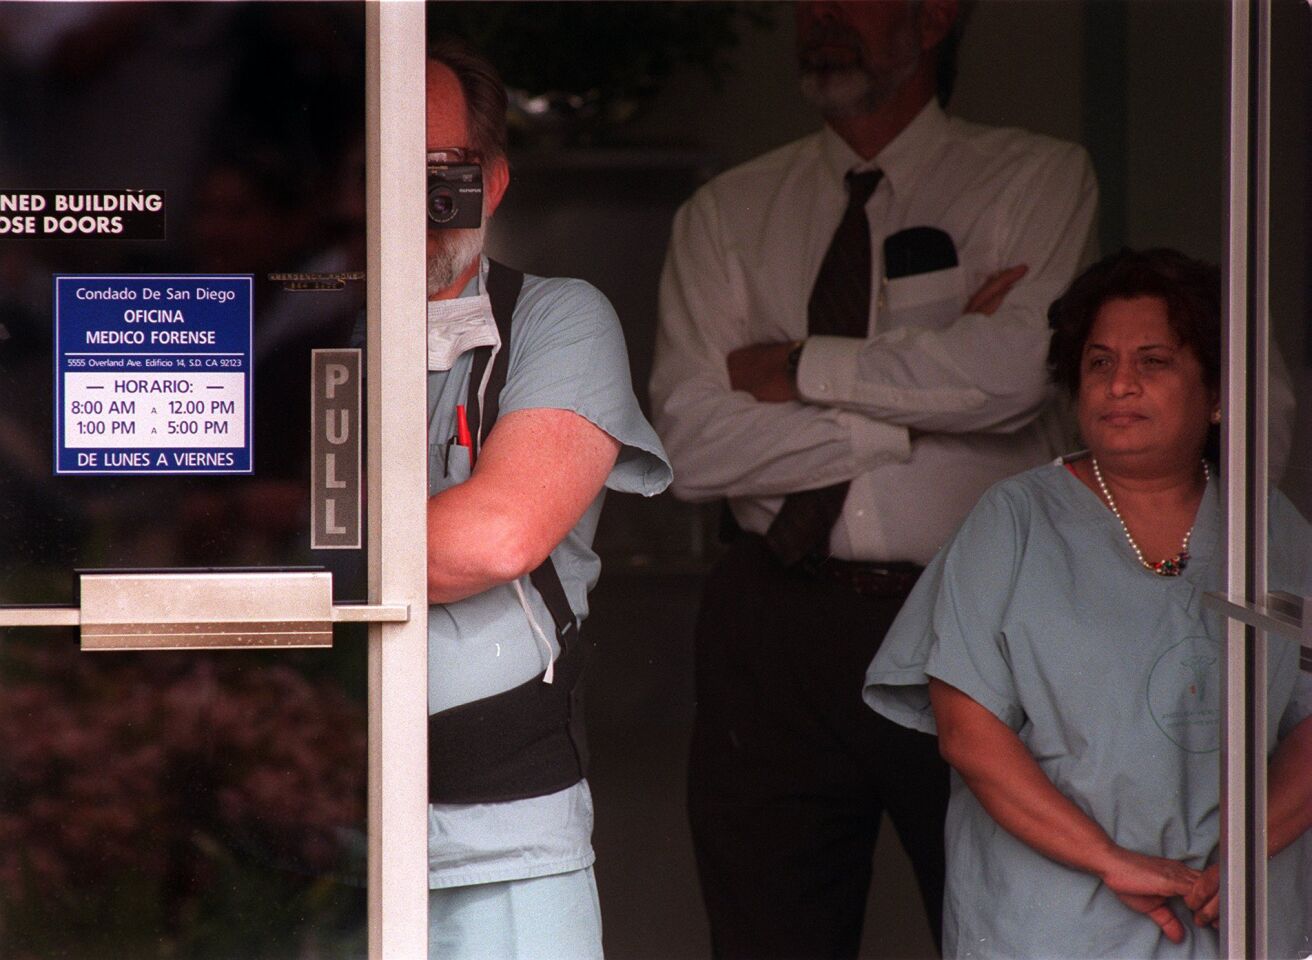 San Diego County Medical Examiner's Office personnel watch and take photographs from the doorway of their office during a news conference on the Heaven's Gate mass suicide in March 1997.